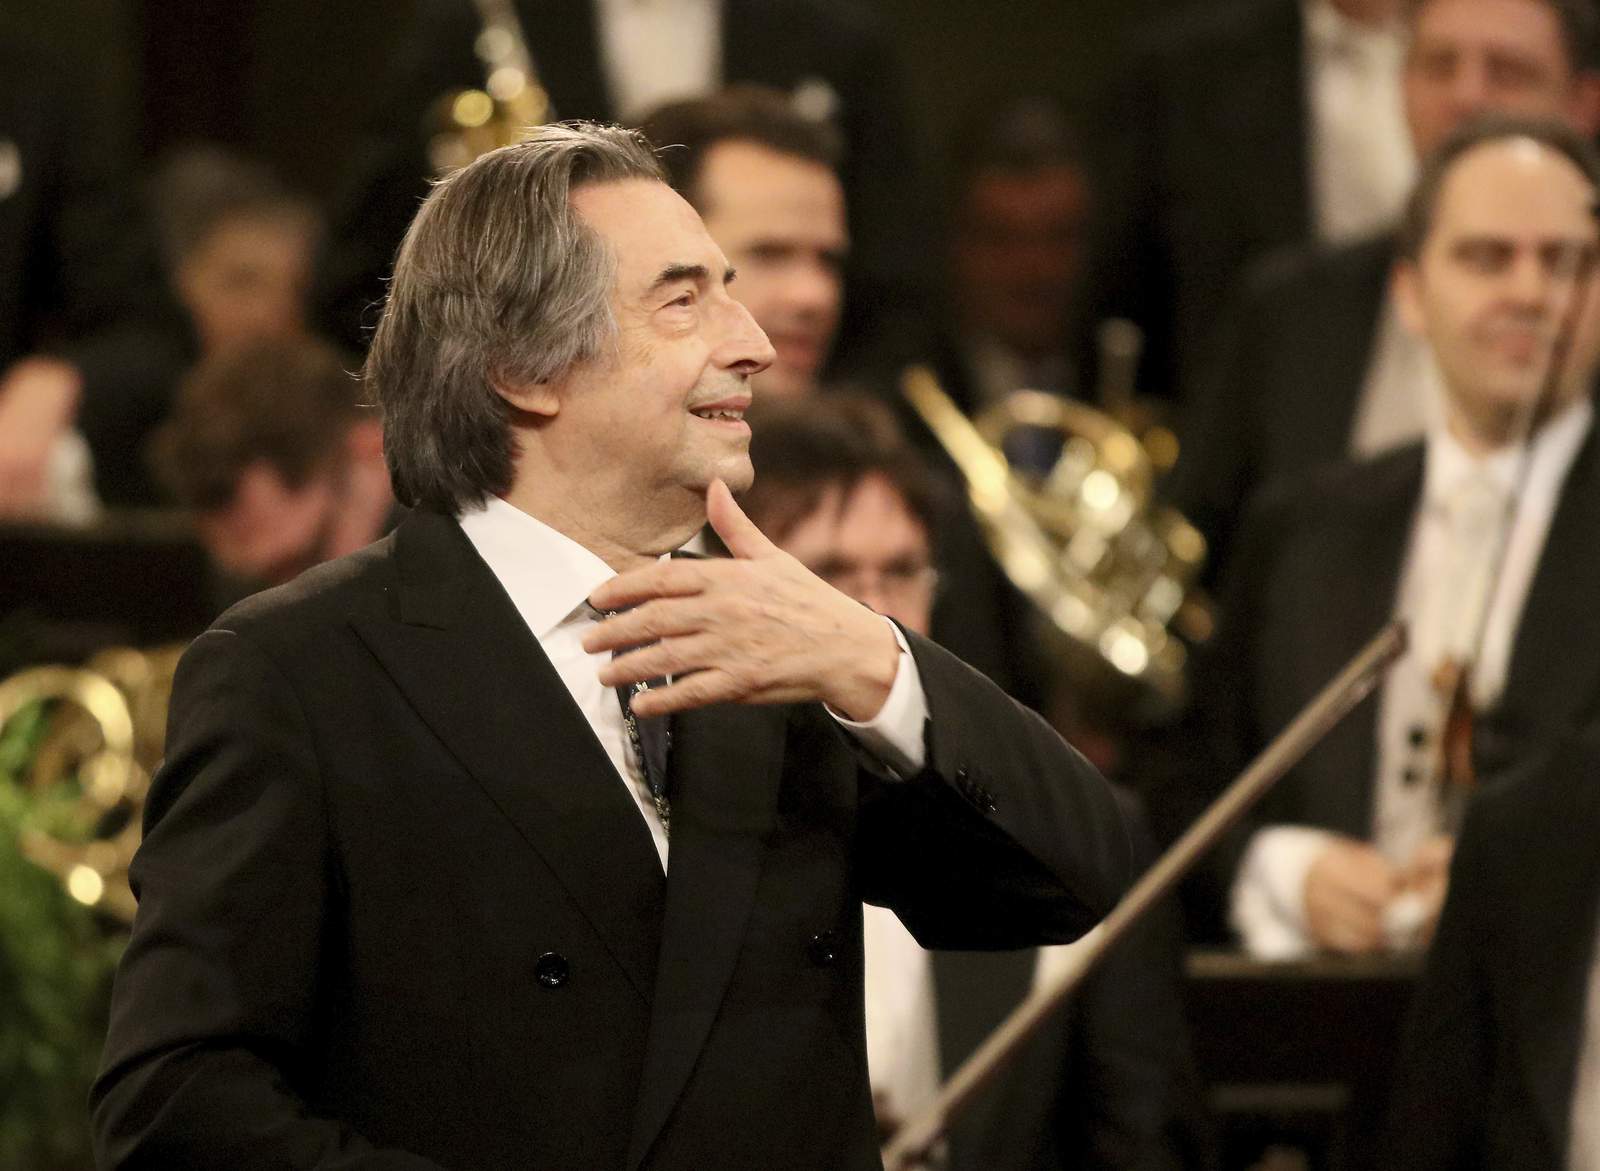 Muti to conduct classical music's return to Italian stage